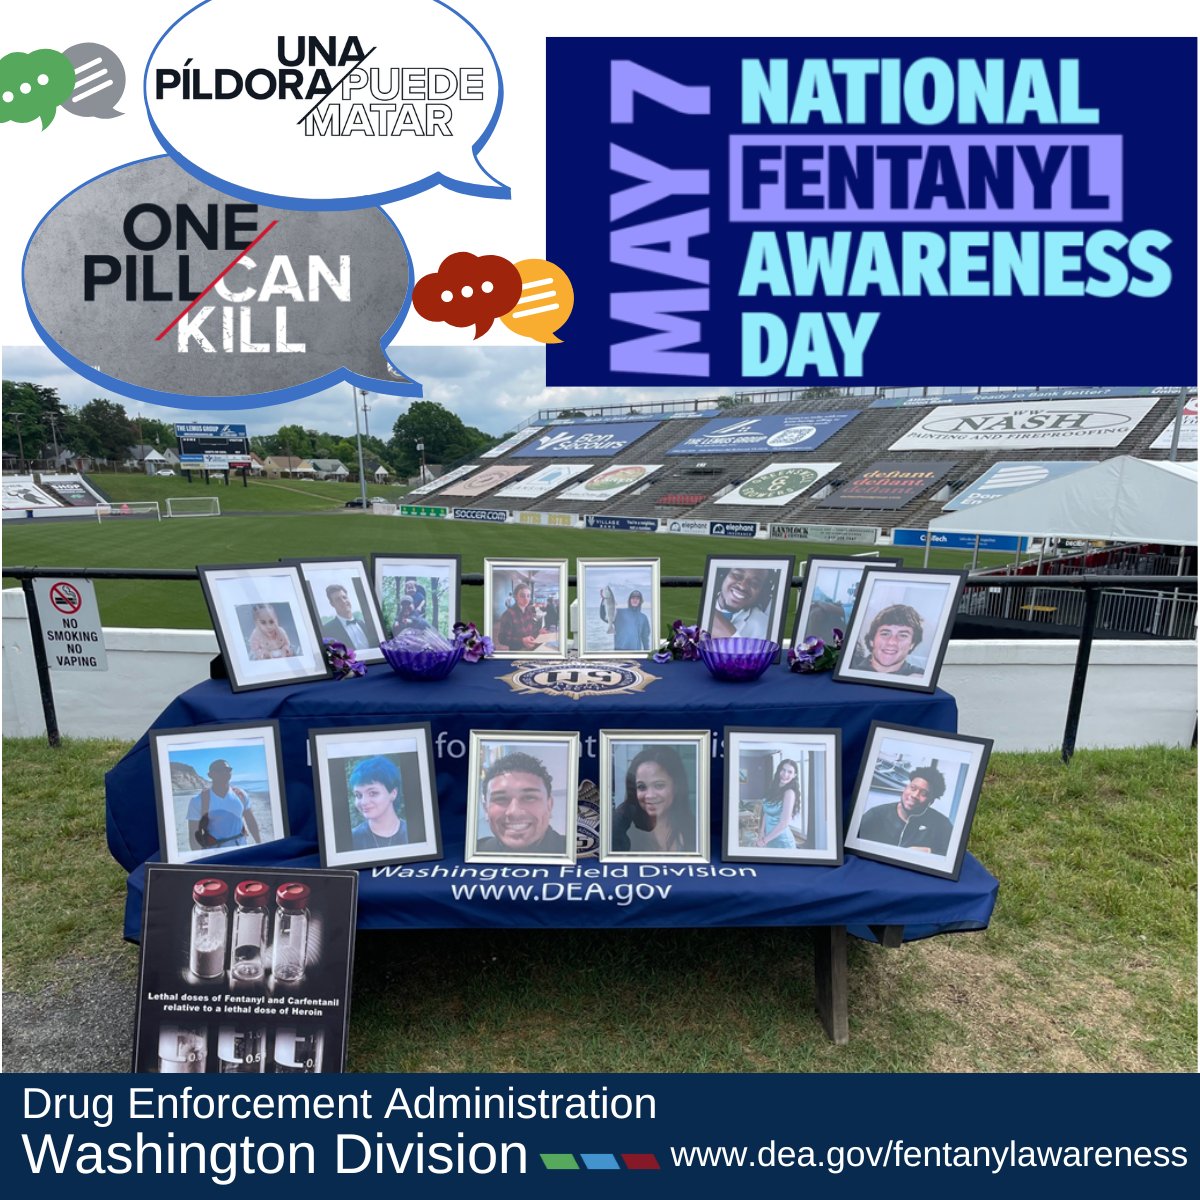 #NationalFentanylAwarenessDay. Today, we remember and honor the lives of those Americans lost to #Fentanyl Poisoning. Joining @VaDeptofHealth in their efforts to educate public schools athletic directors and coaches. Together spreading the word: #OnePillcanKill.